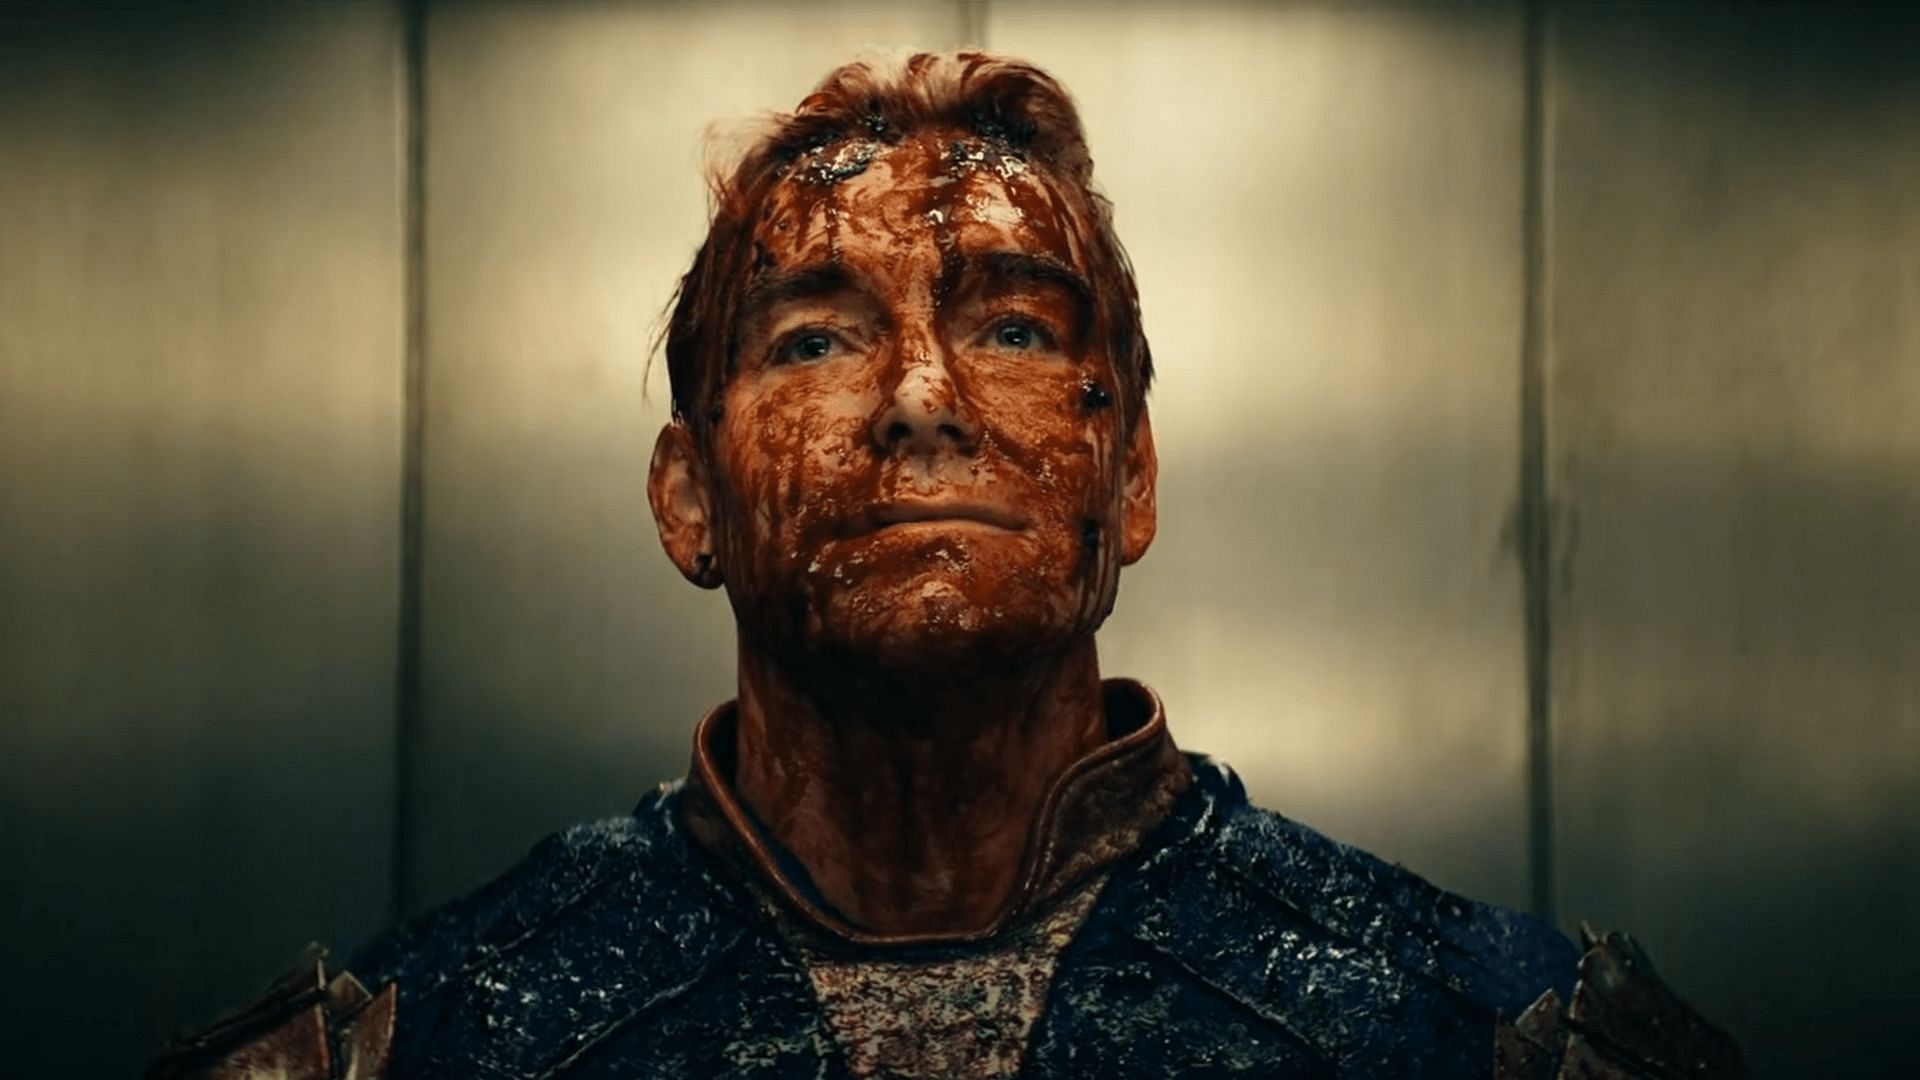 The bloodied Homelander (Image by Prime Video)